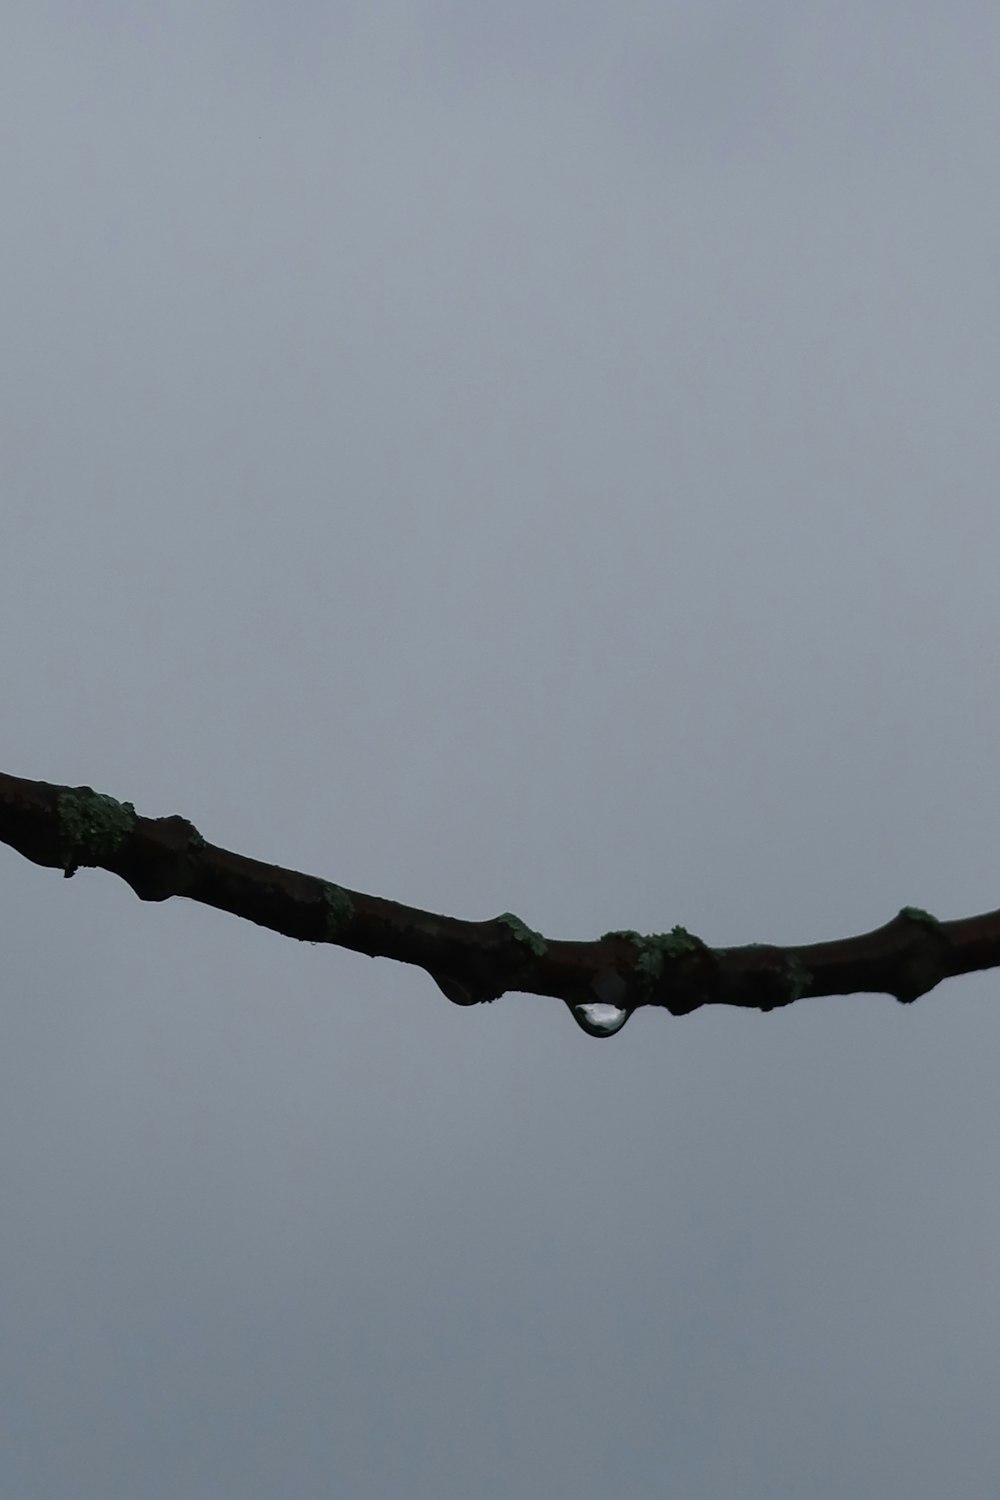 a tree branch with water on it